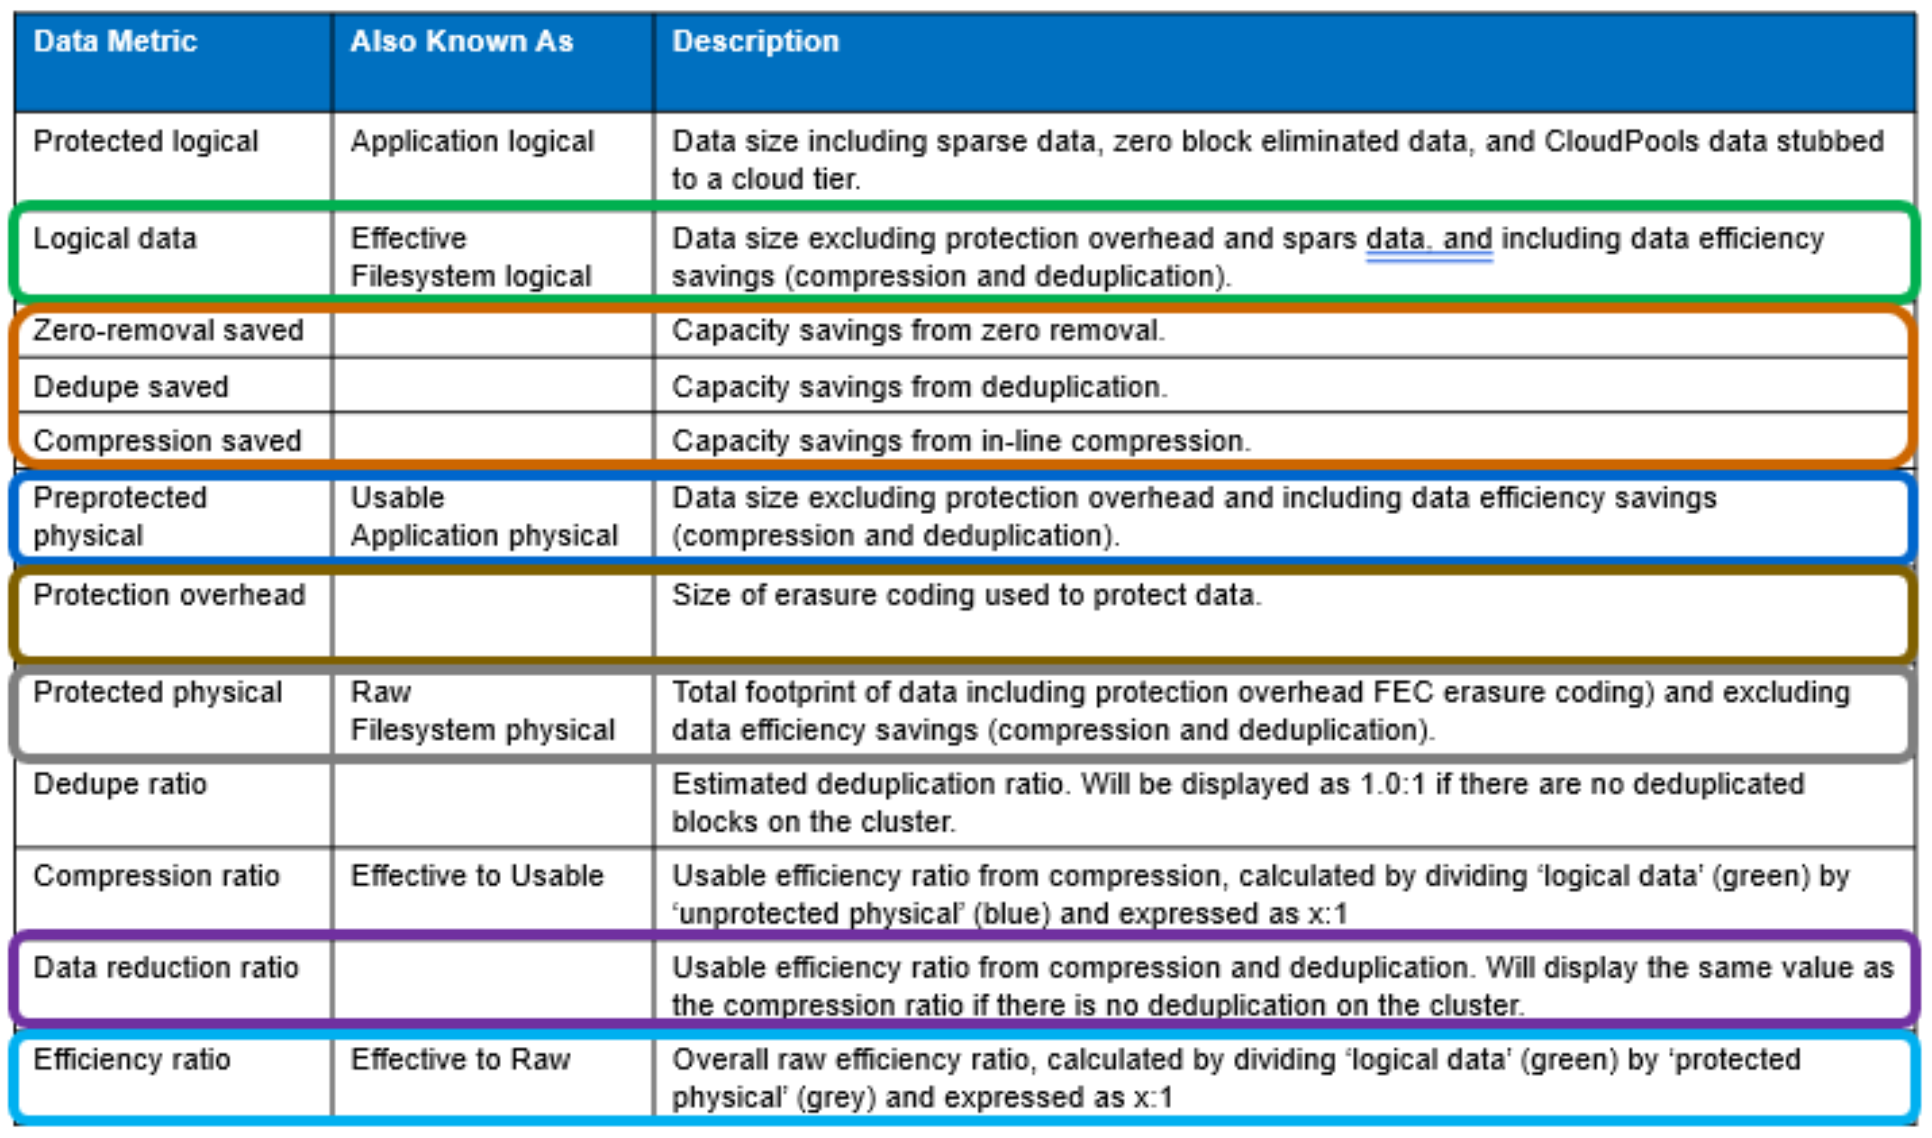 Table outlining OneFS data reduction reporting metrics.